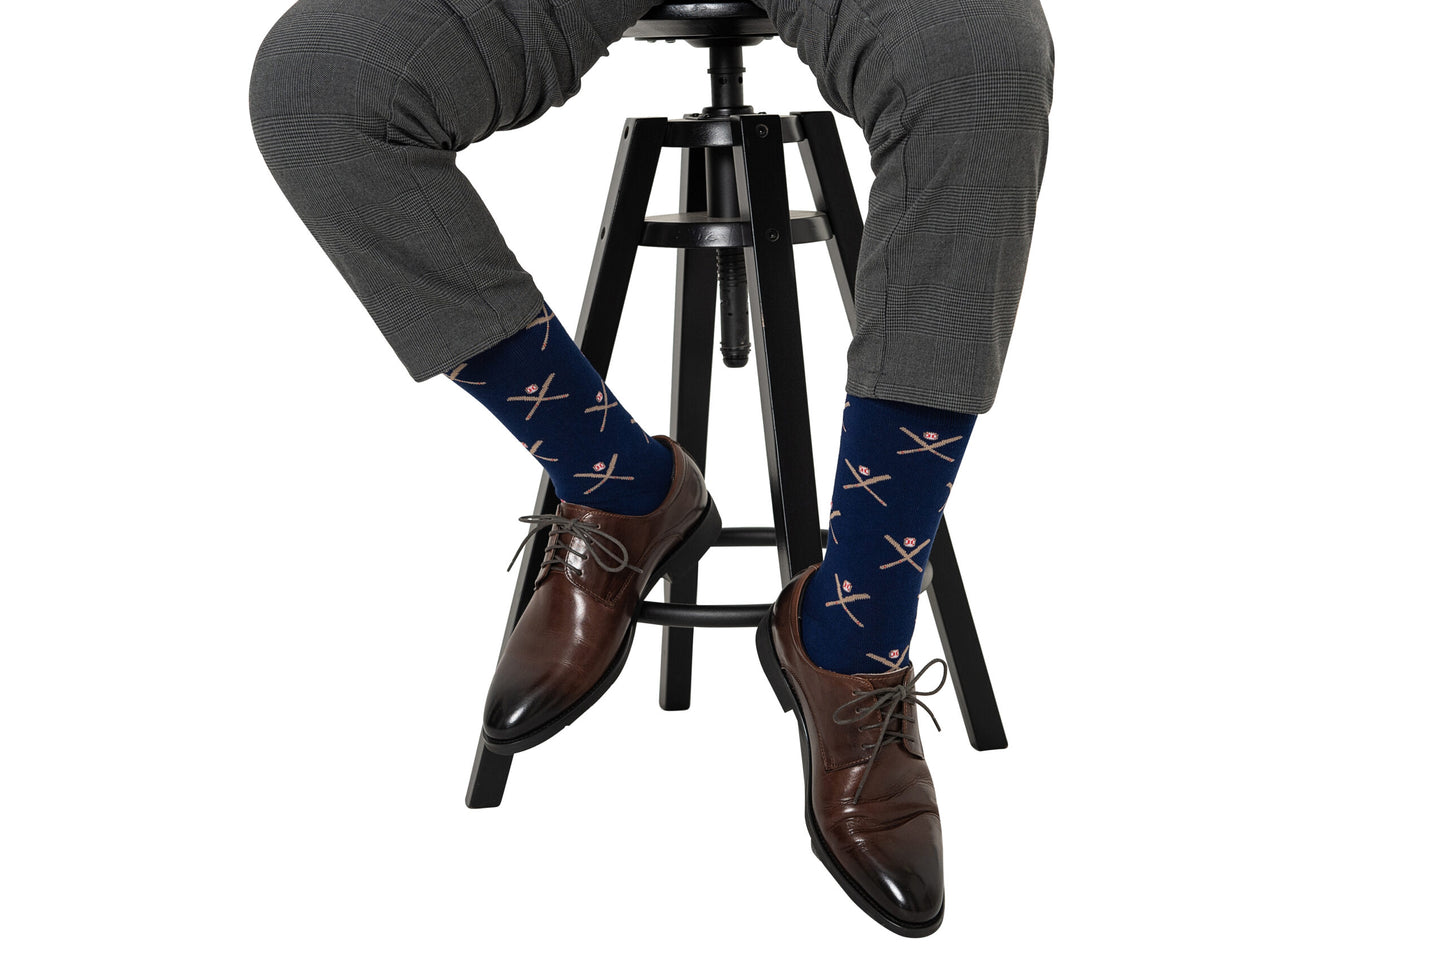 A man sitting on a stool wearing a pair of Crossed Baseball Socks.